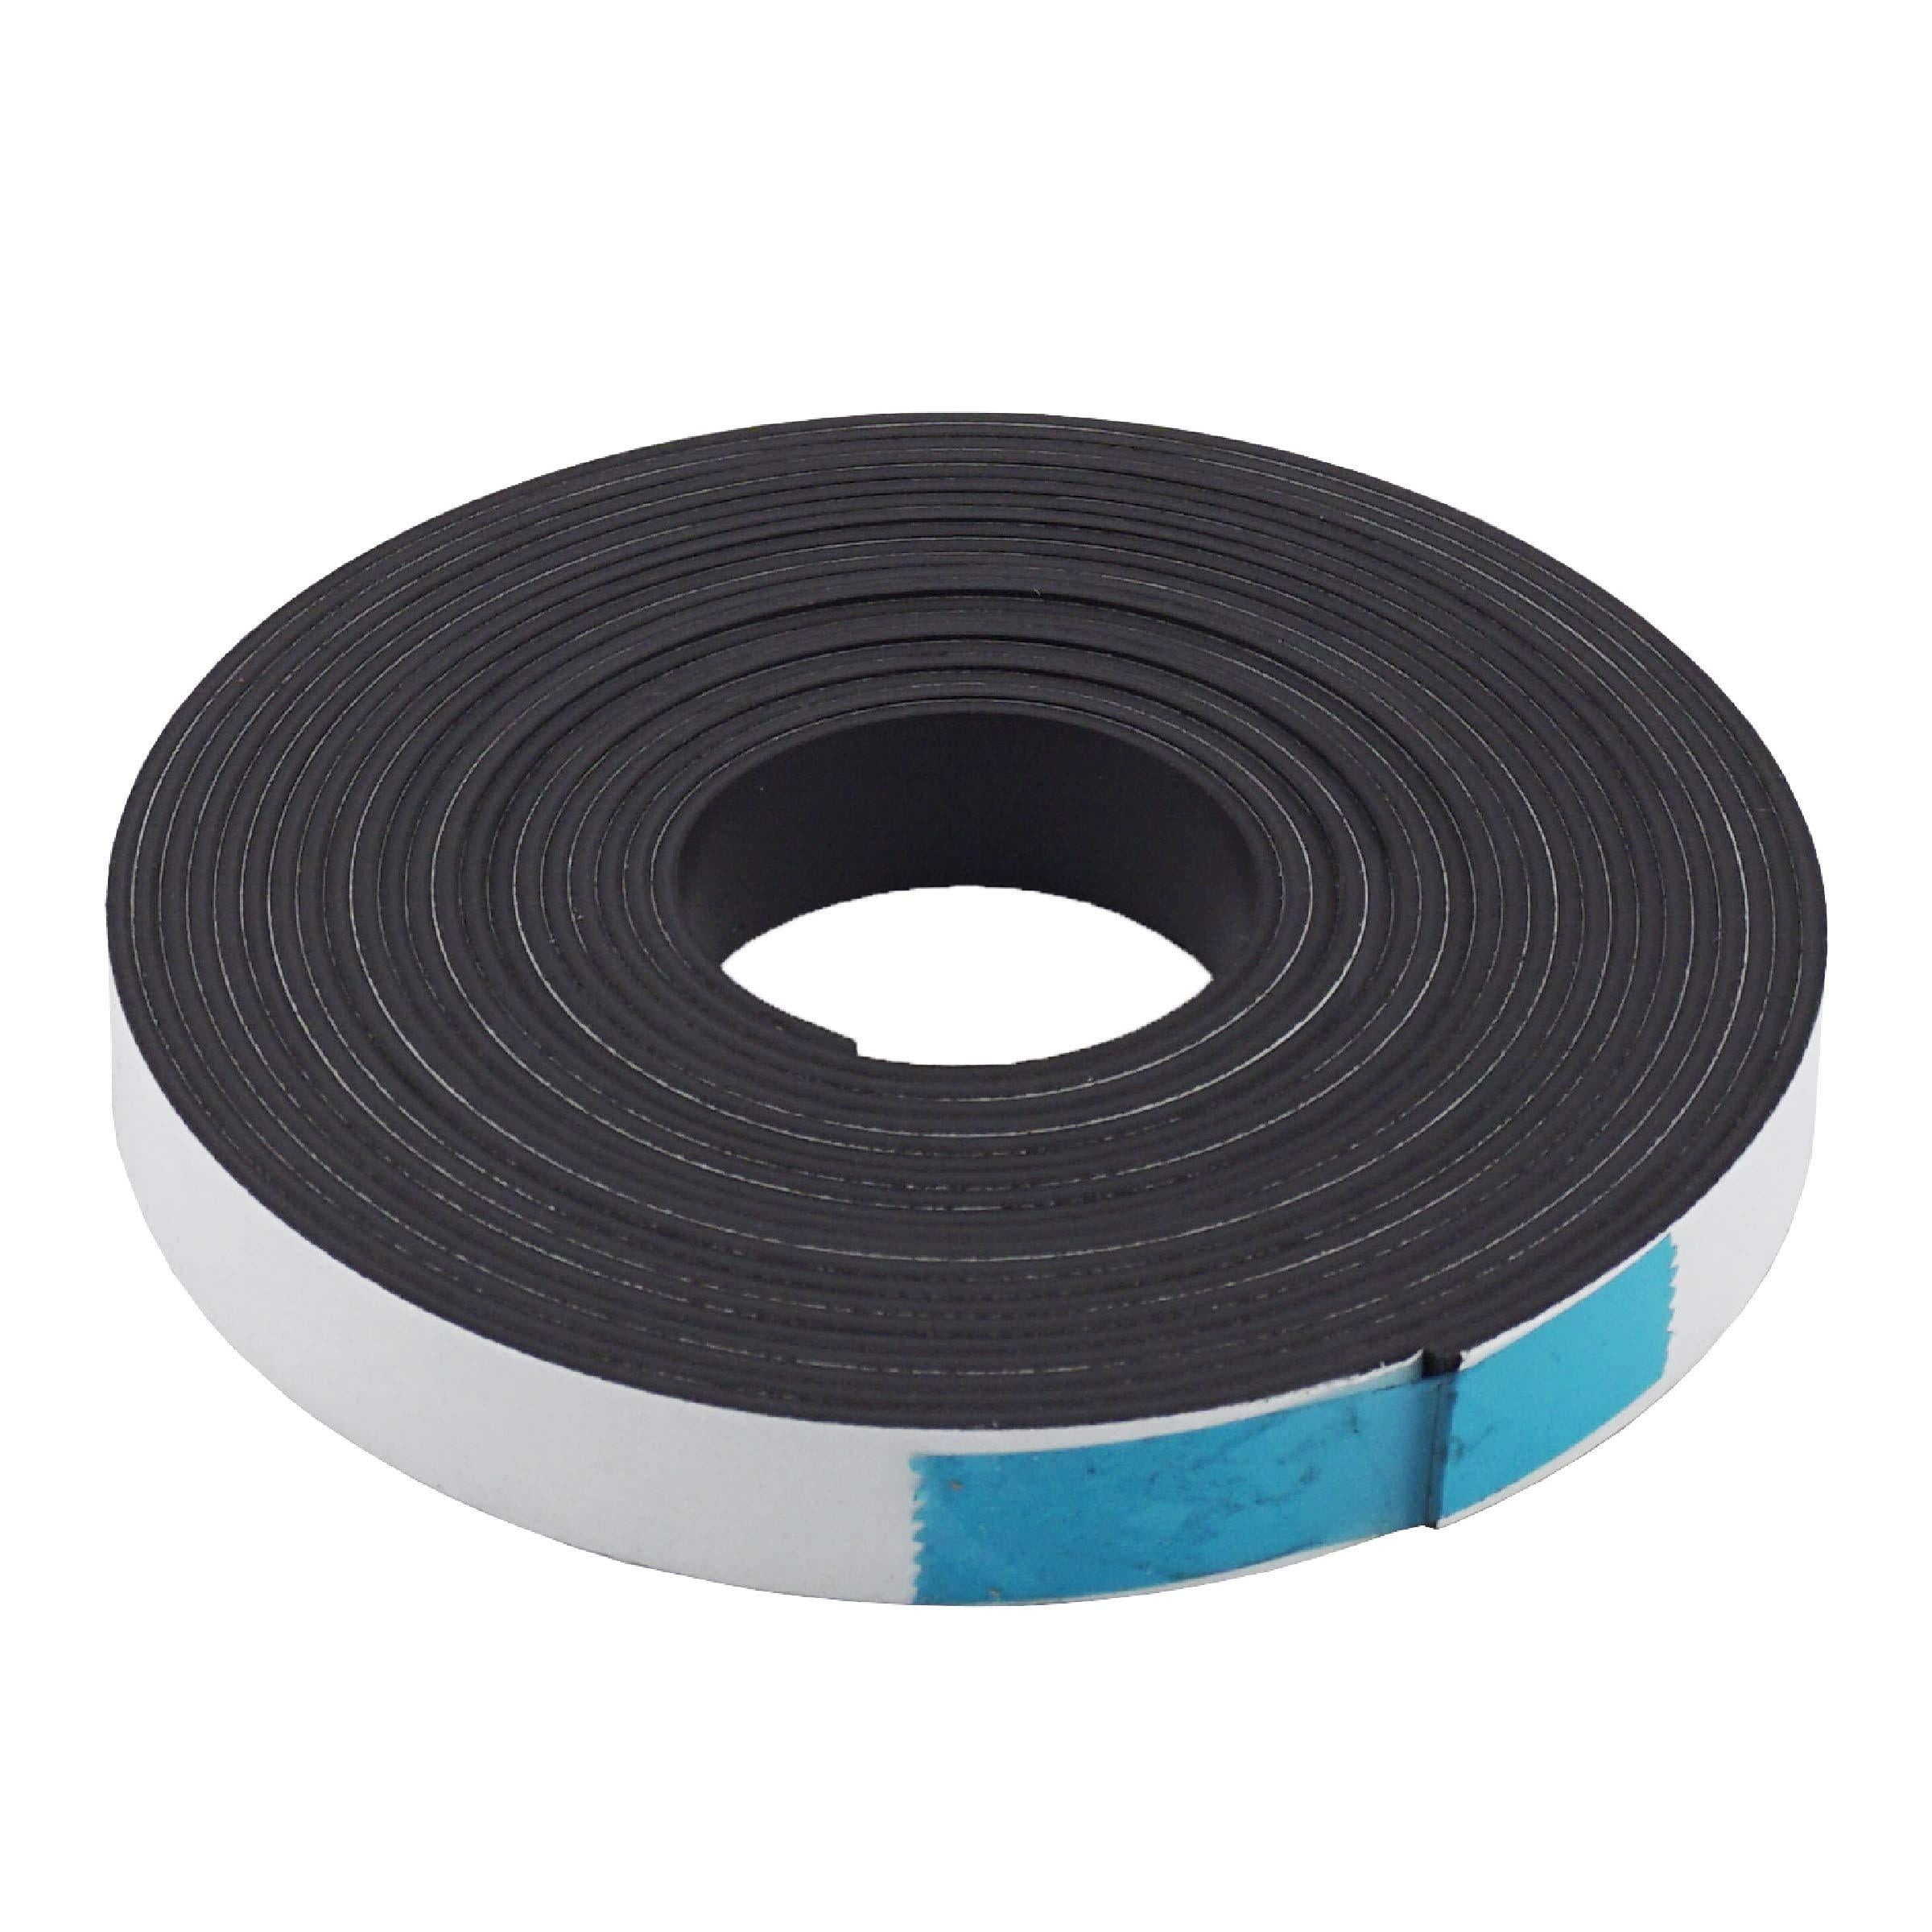 Master Magnetics ZGN40S3 Flexible Magnet Strip, Plain, No Laminate, 1/16  Thick, 1 Height, 100 Feet Scored Every 3, 1 Roll with 396-1 x 3 Pieces